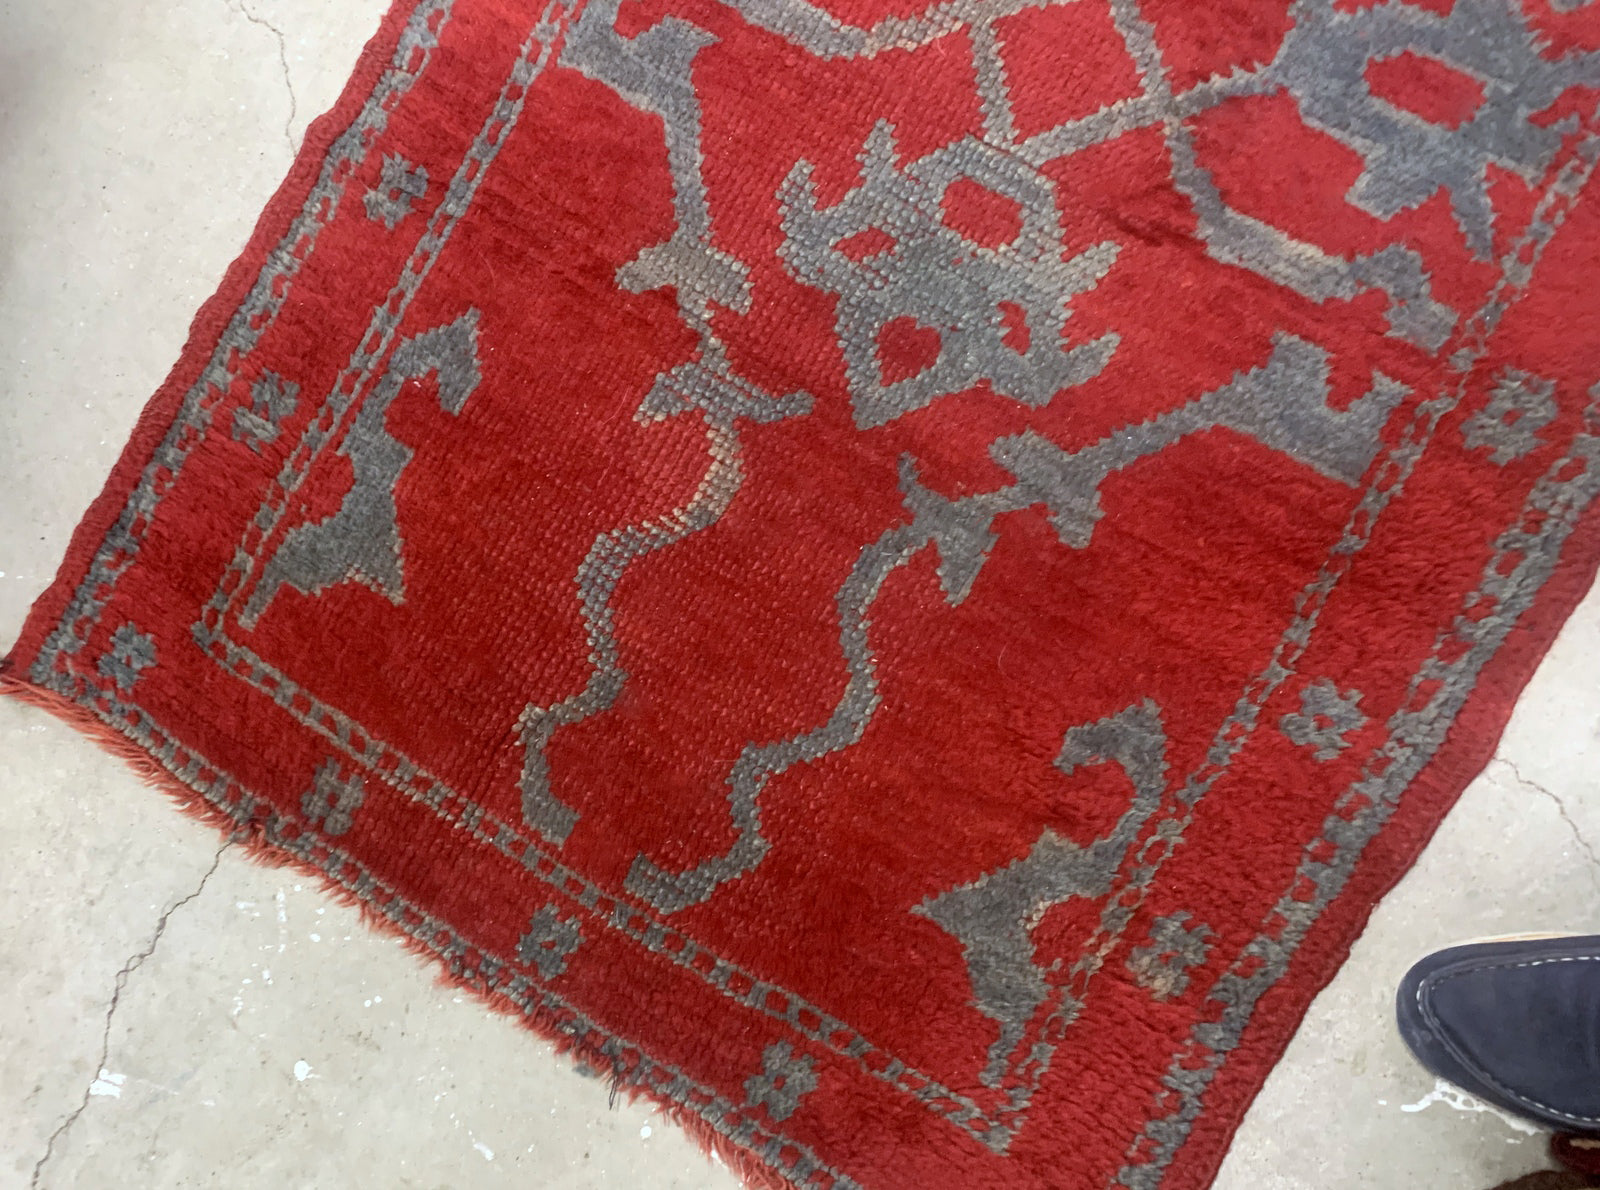 Handmade antique Turkish red rug from Oushak region. The rug is from the end of 19th century in original condition, it has some signs of age.